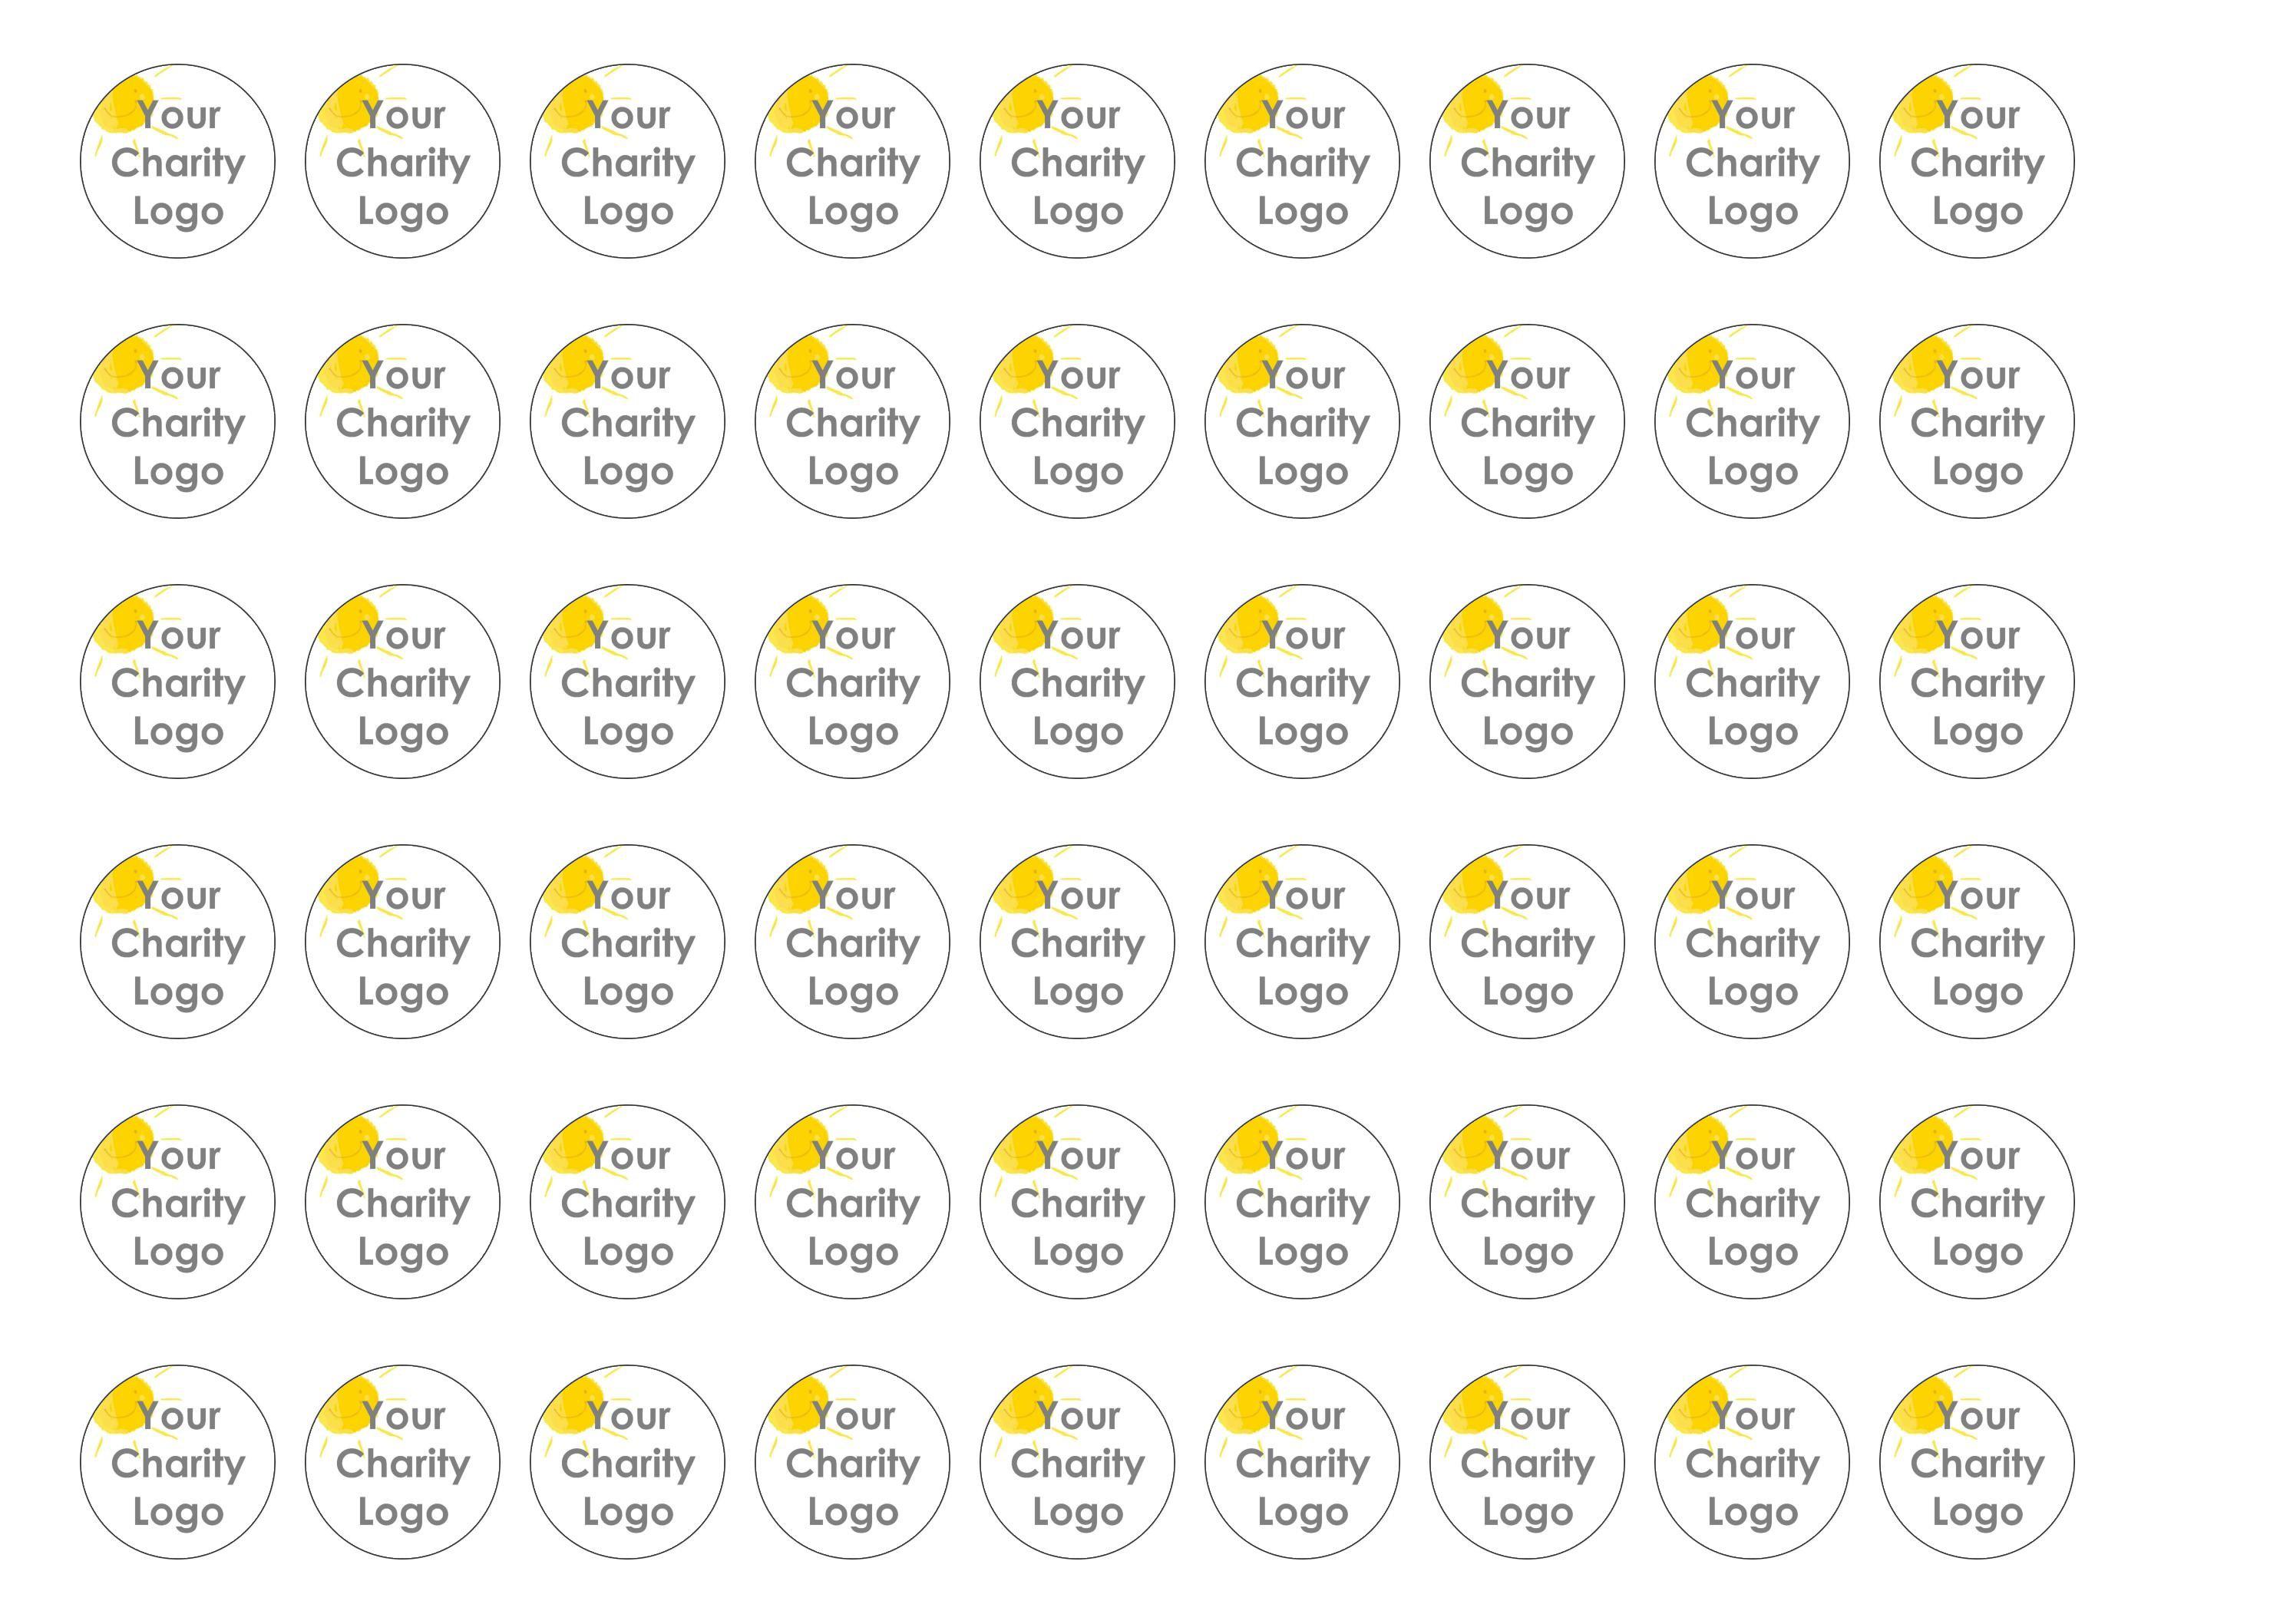 54 x 23mm printed cupcake toppers with your own charity logo